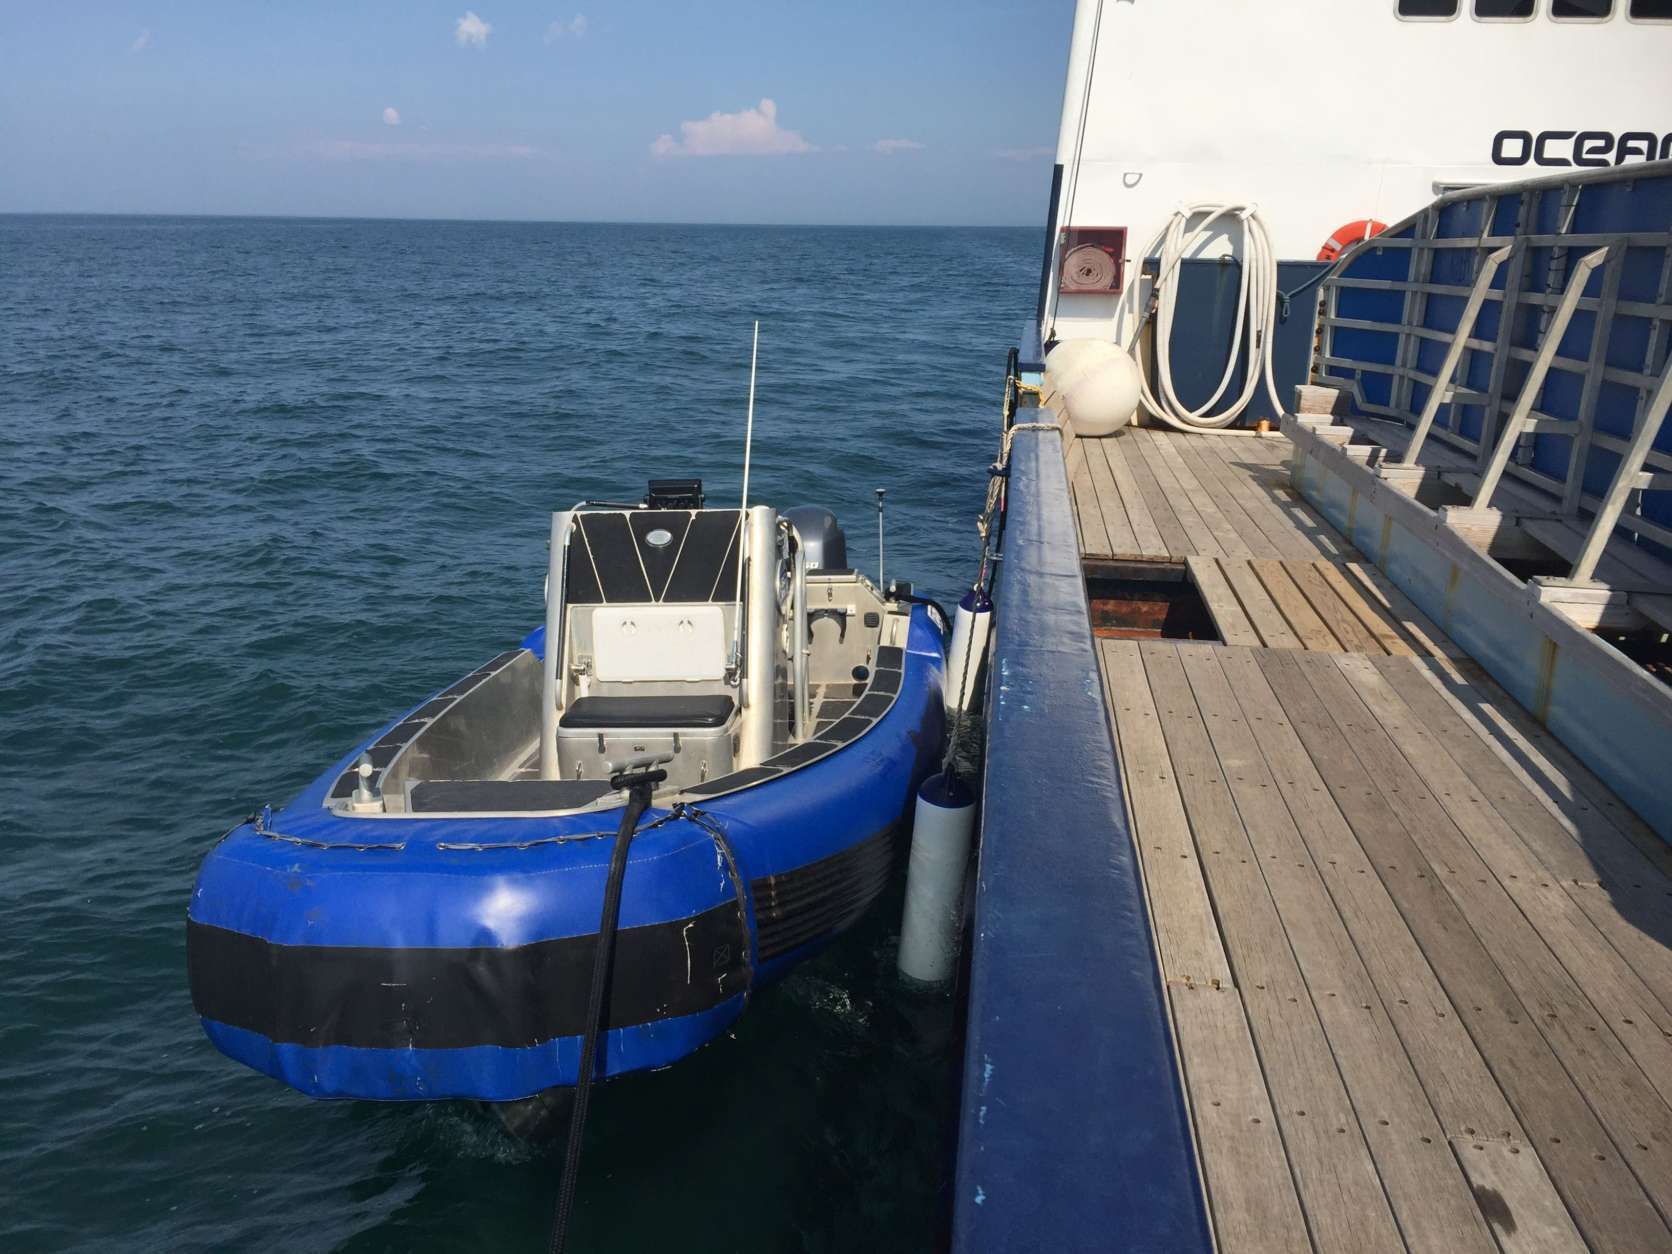 This smaller vessel is called a SAFE Boat and is used to bring visitors to the OCEARCH. (WTOP/Michelle Basch)